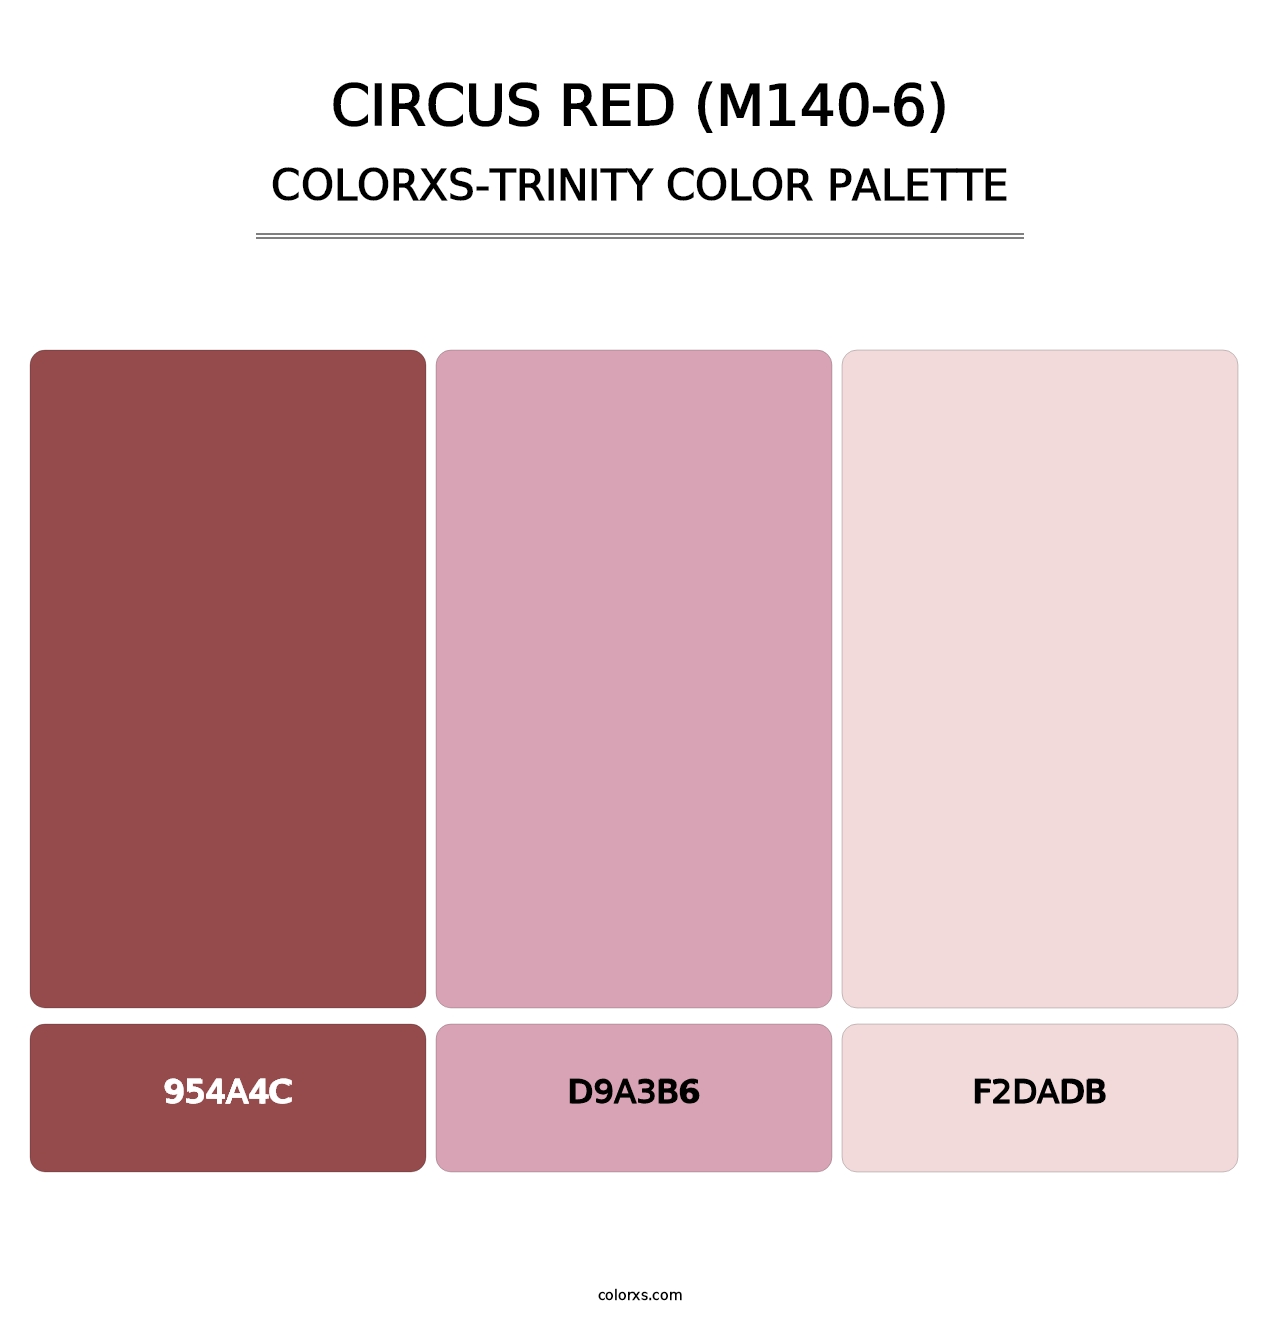 Circus Red (M140-6) - Colorxs Trinity Palette